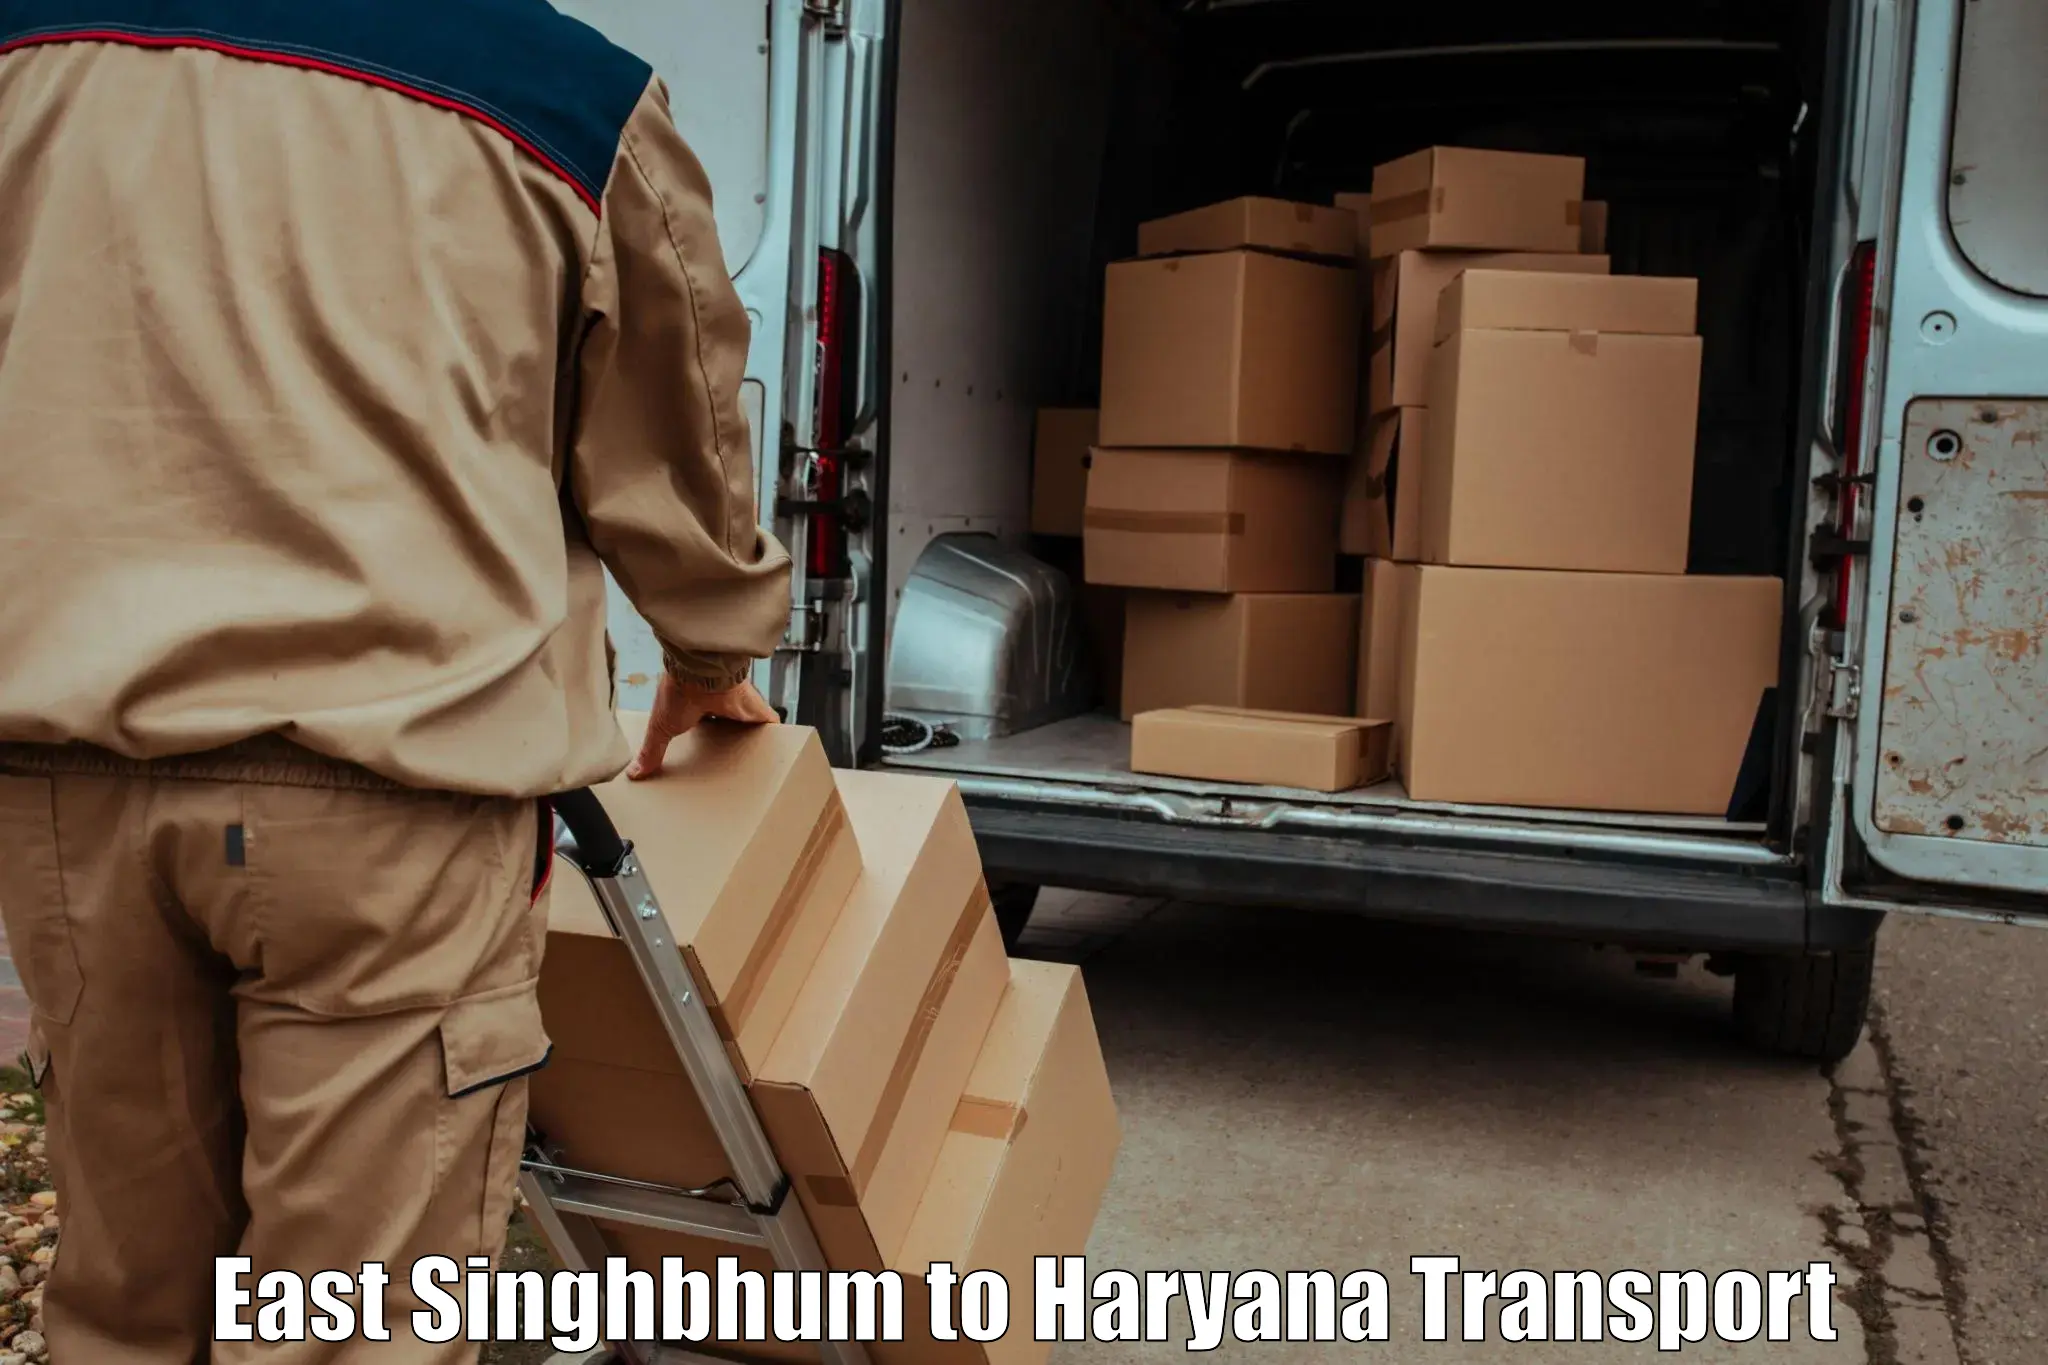 Commercial transport service East Singhbhum to Narnaul